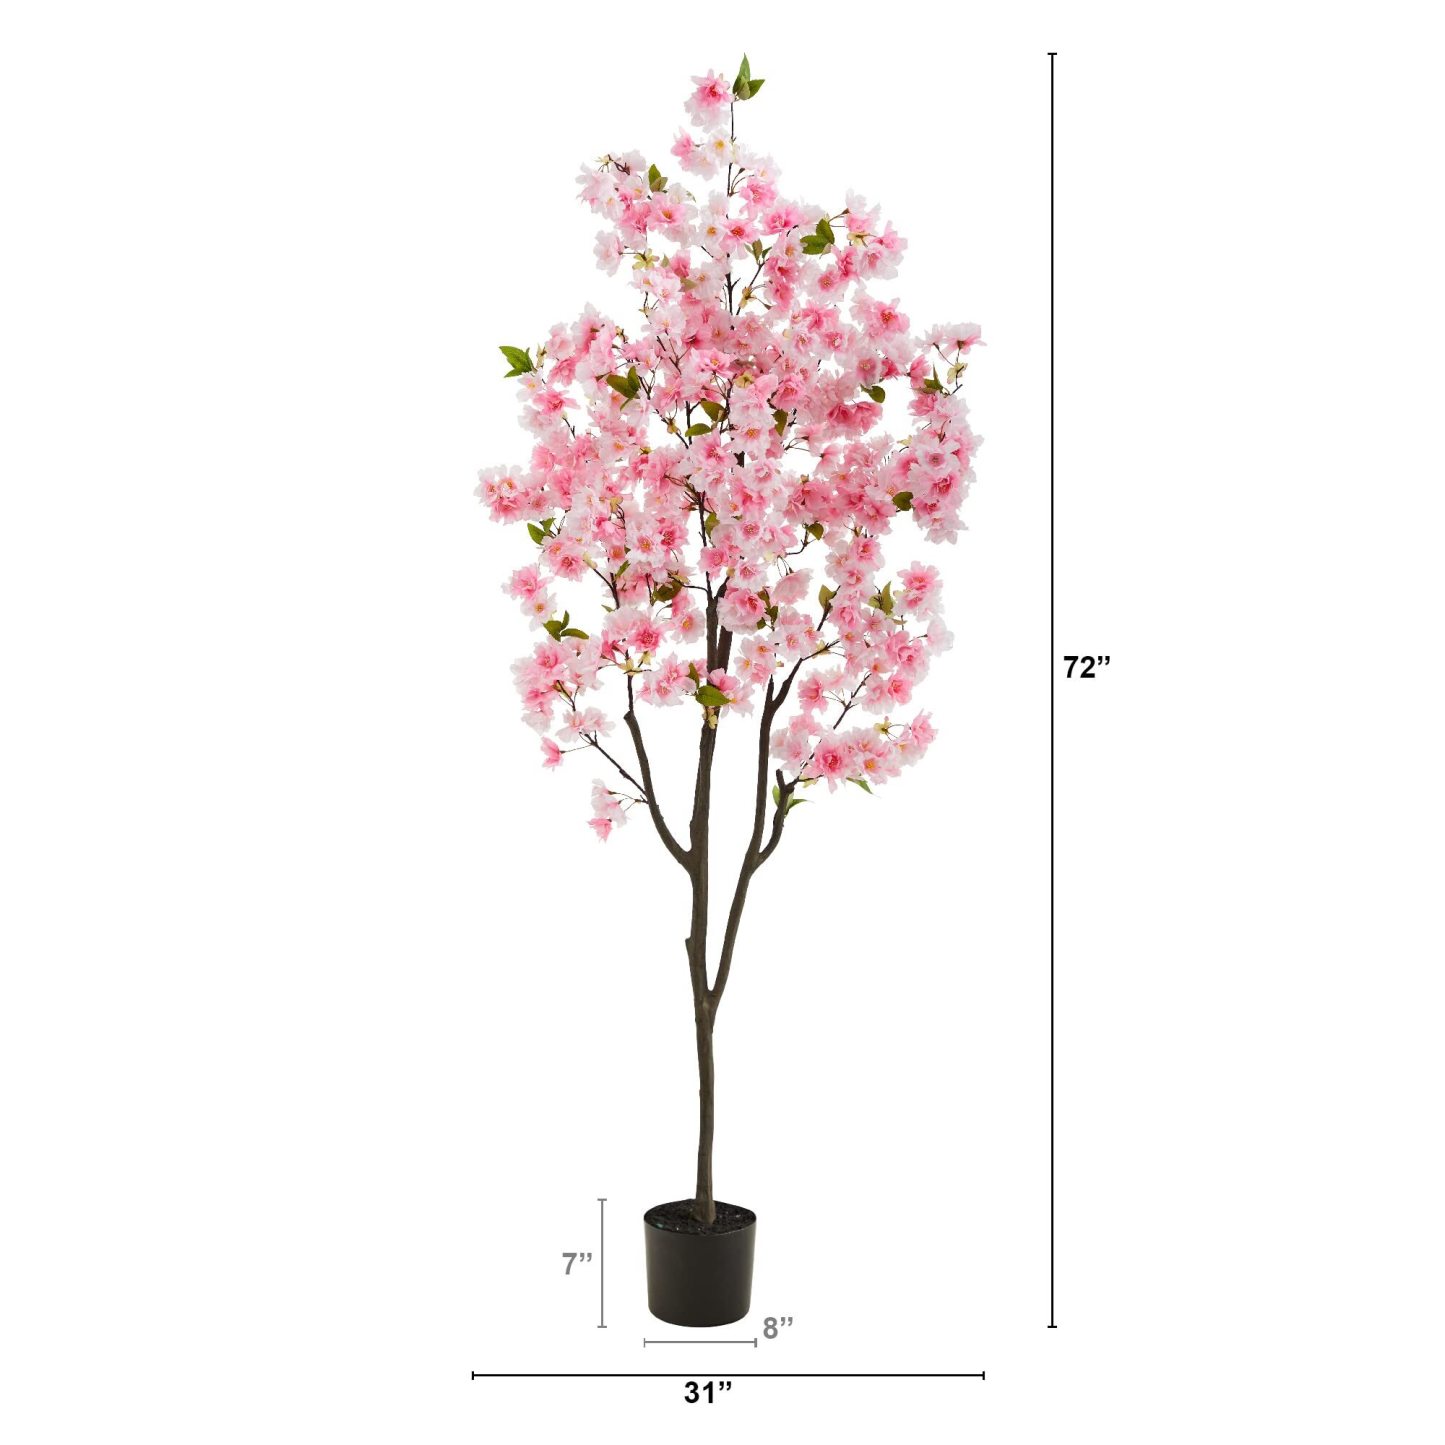 ✨HOT SALE✨Nearly Natural 6ft. Cherry Blossom Artificial Tree🌸